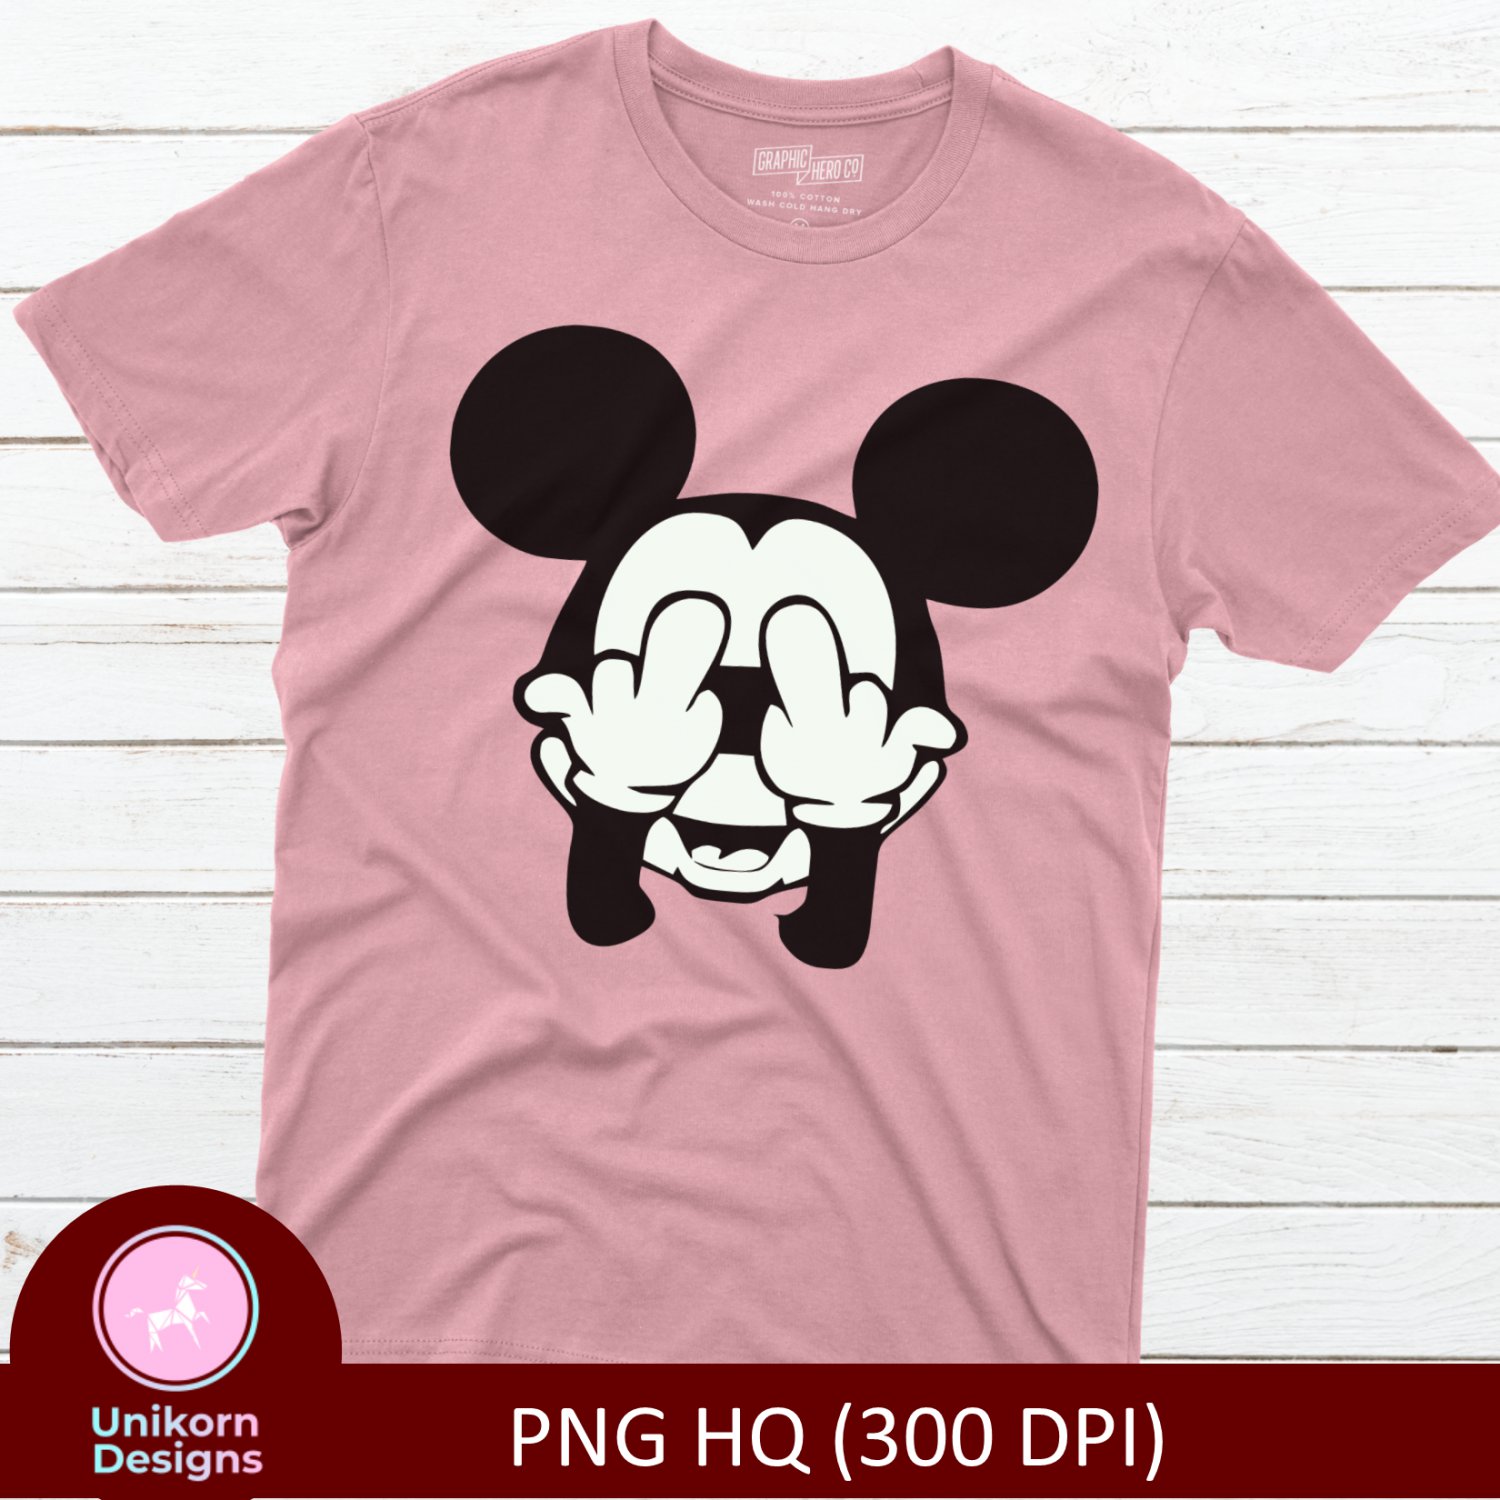 Mickey D3 Disney Toon Tee Shirt Design Graphic Instant Download Transfer